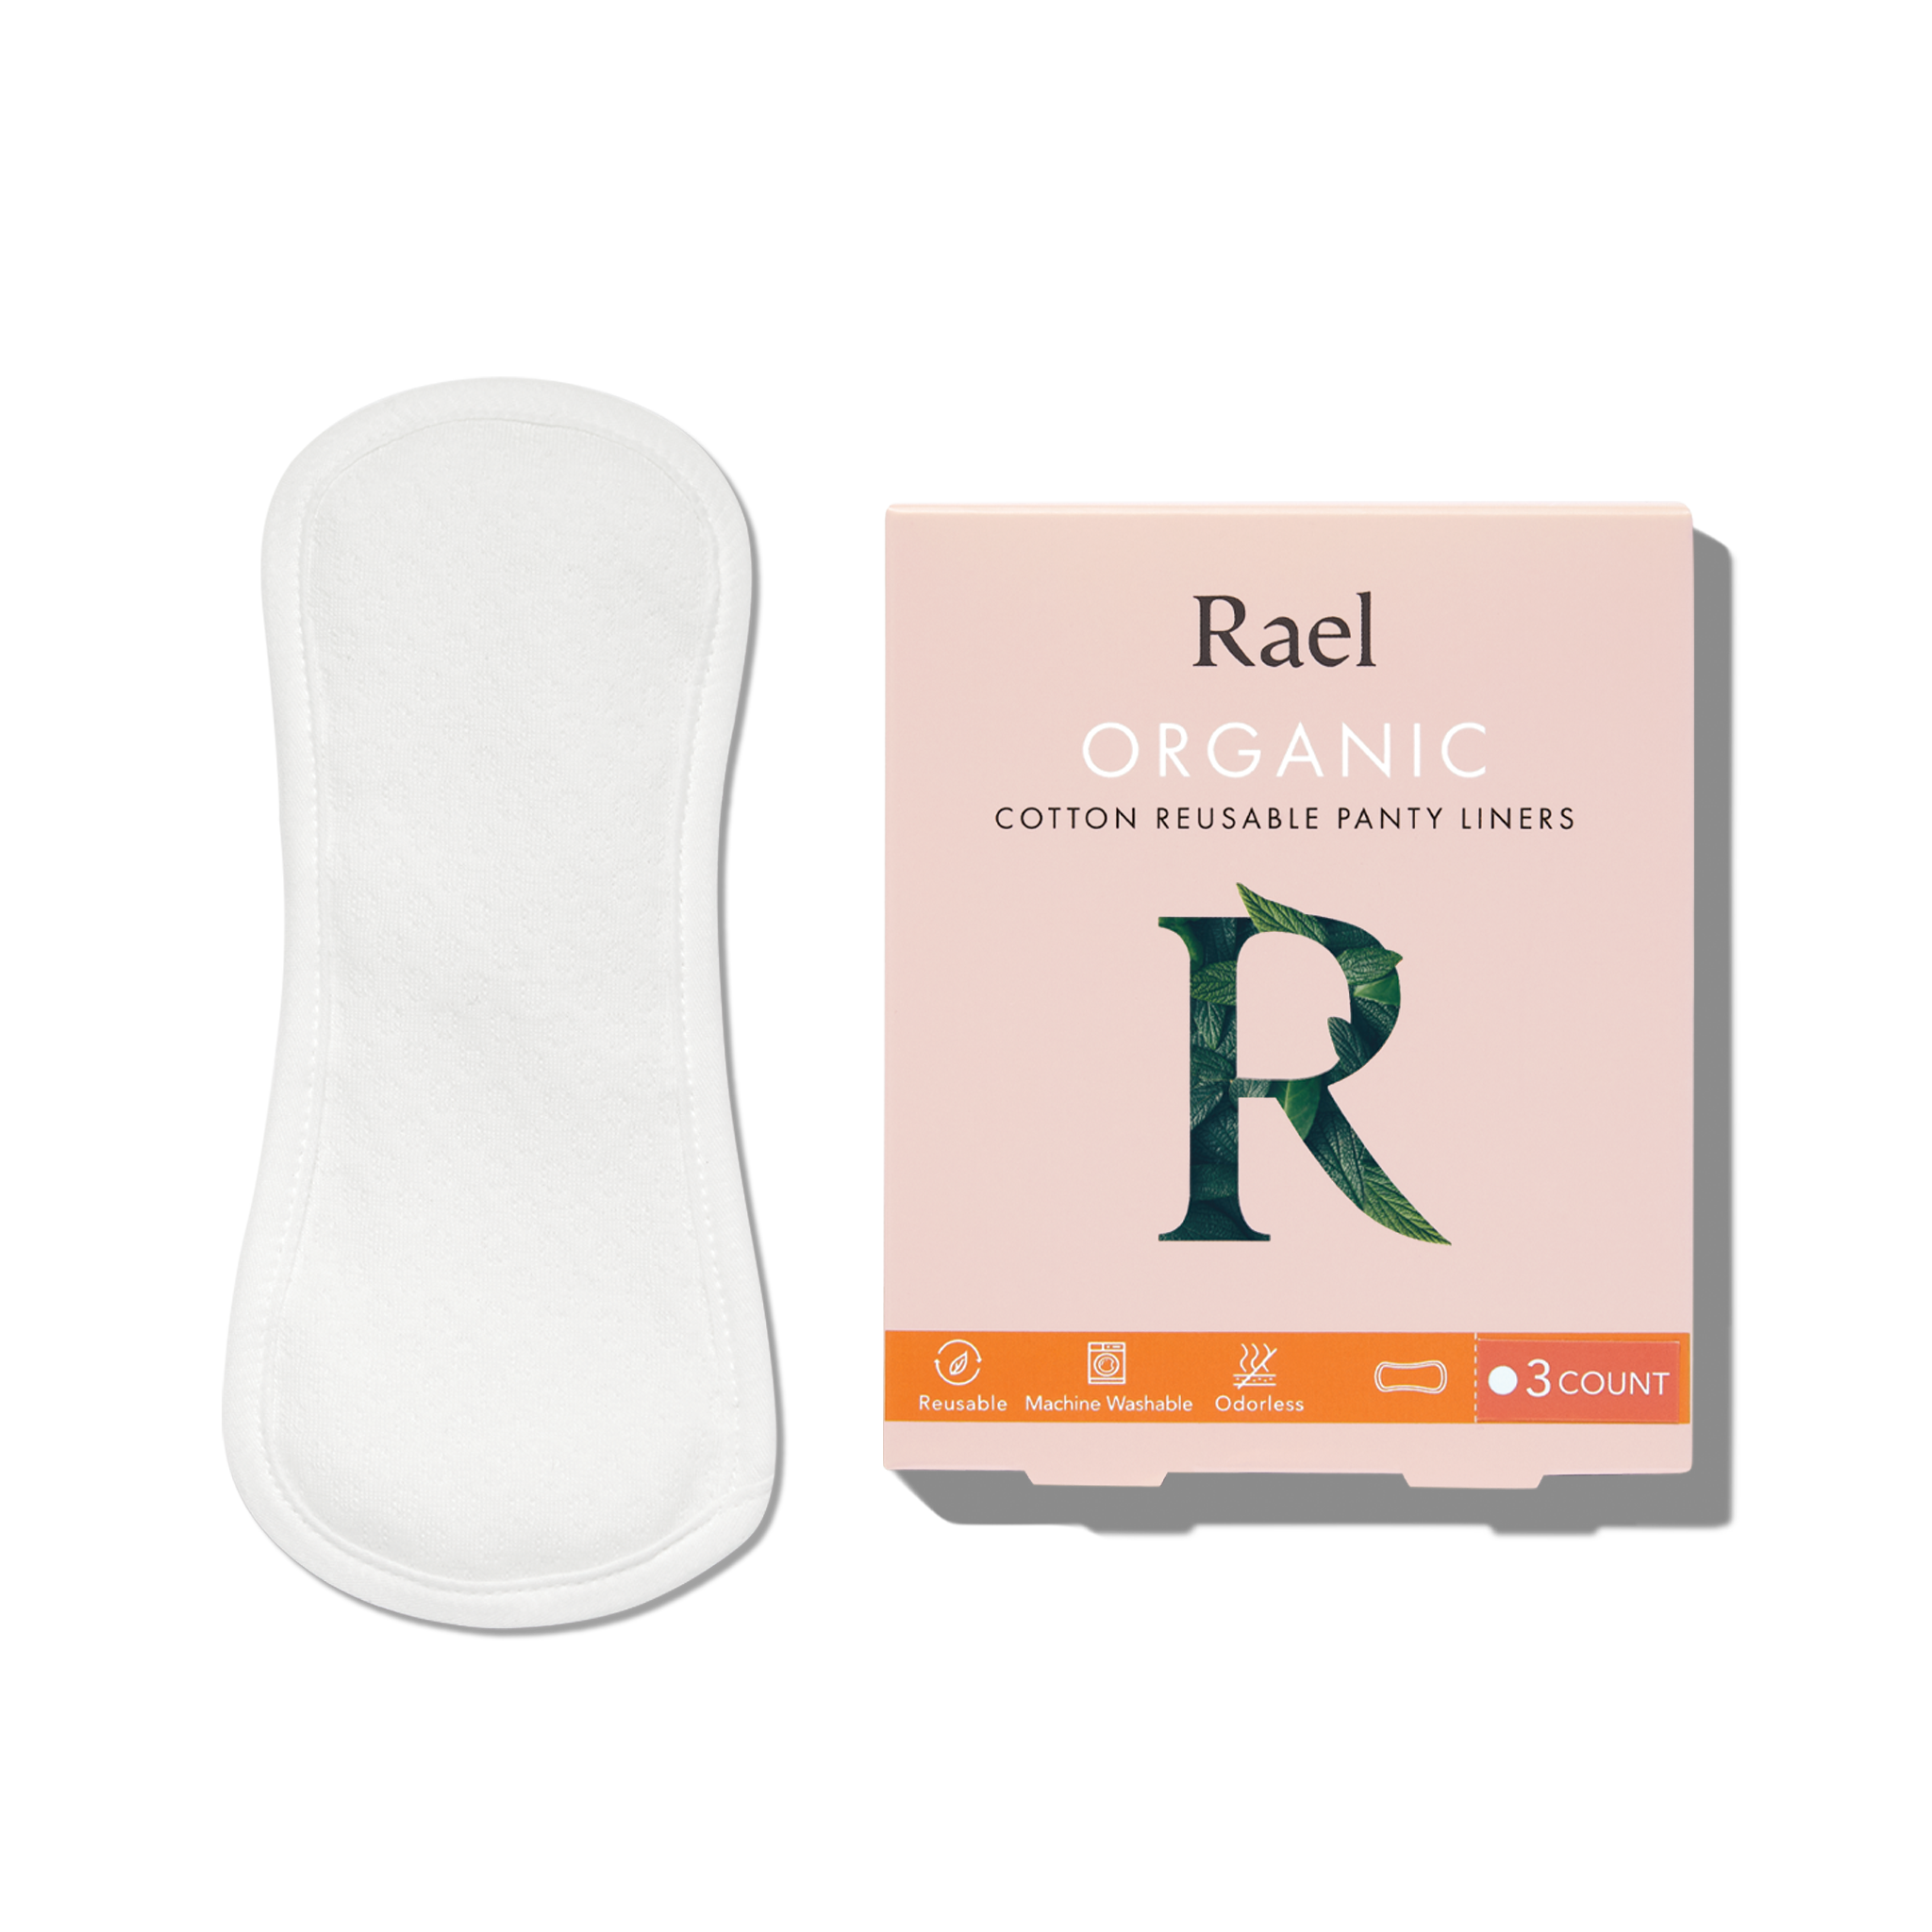 Rael Organic Cotton Long Panty Liners, 40ct - Unscented, Chlorine Free,  Pantiliners - Natural, Daily Pantyliners